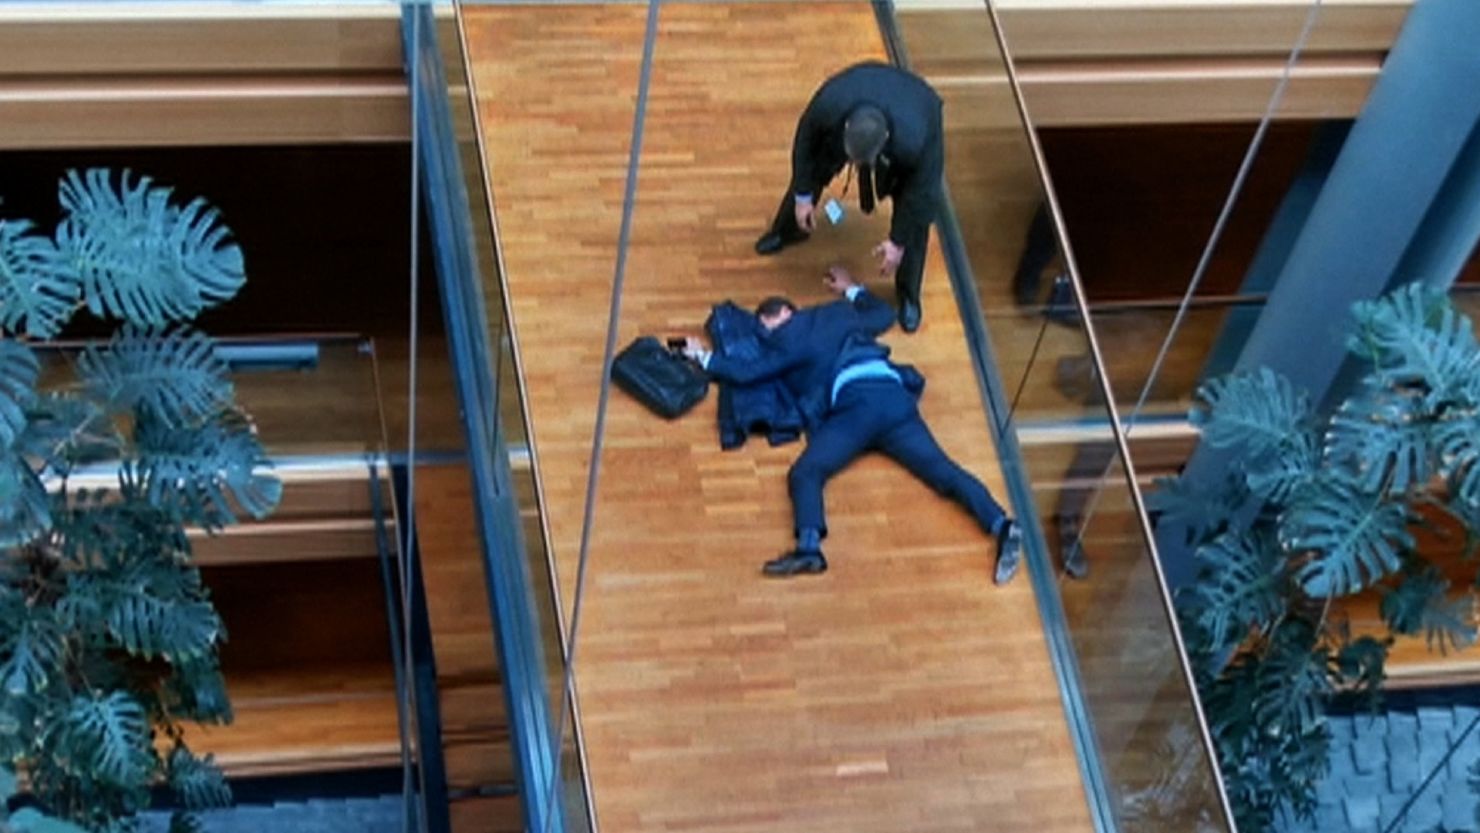 UKIP MEP Steven Woolfe collapsed at the European Parliament in Strasbourg, hours after an altercation with Mike Hookem October 6, 2016.